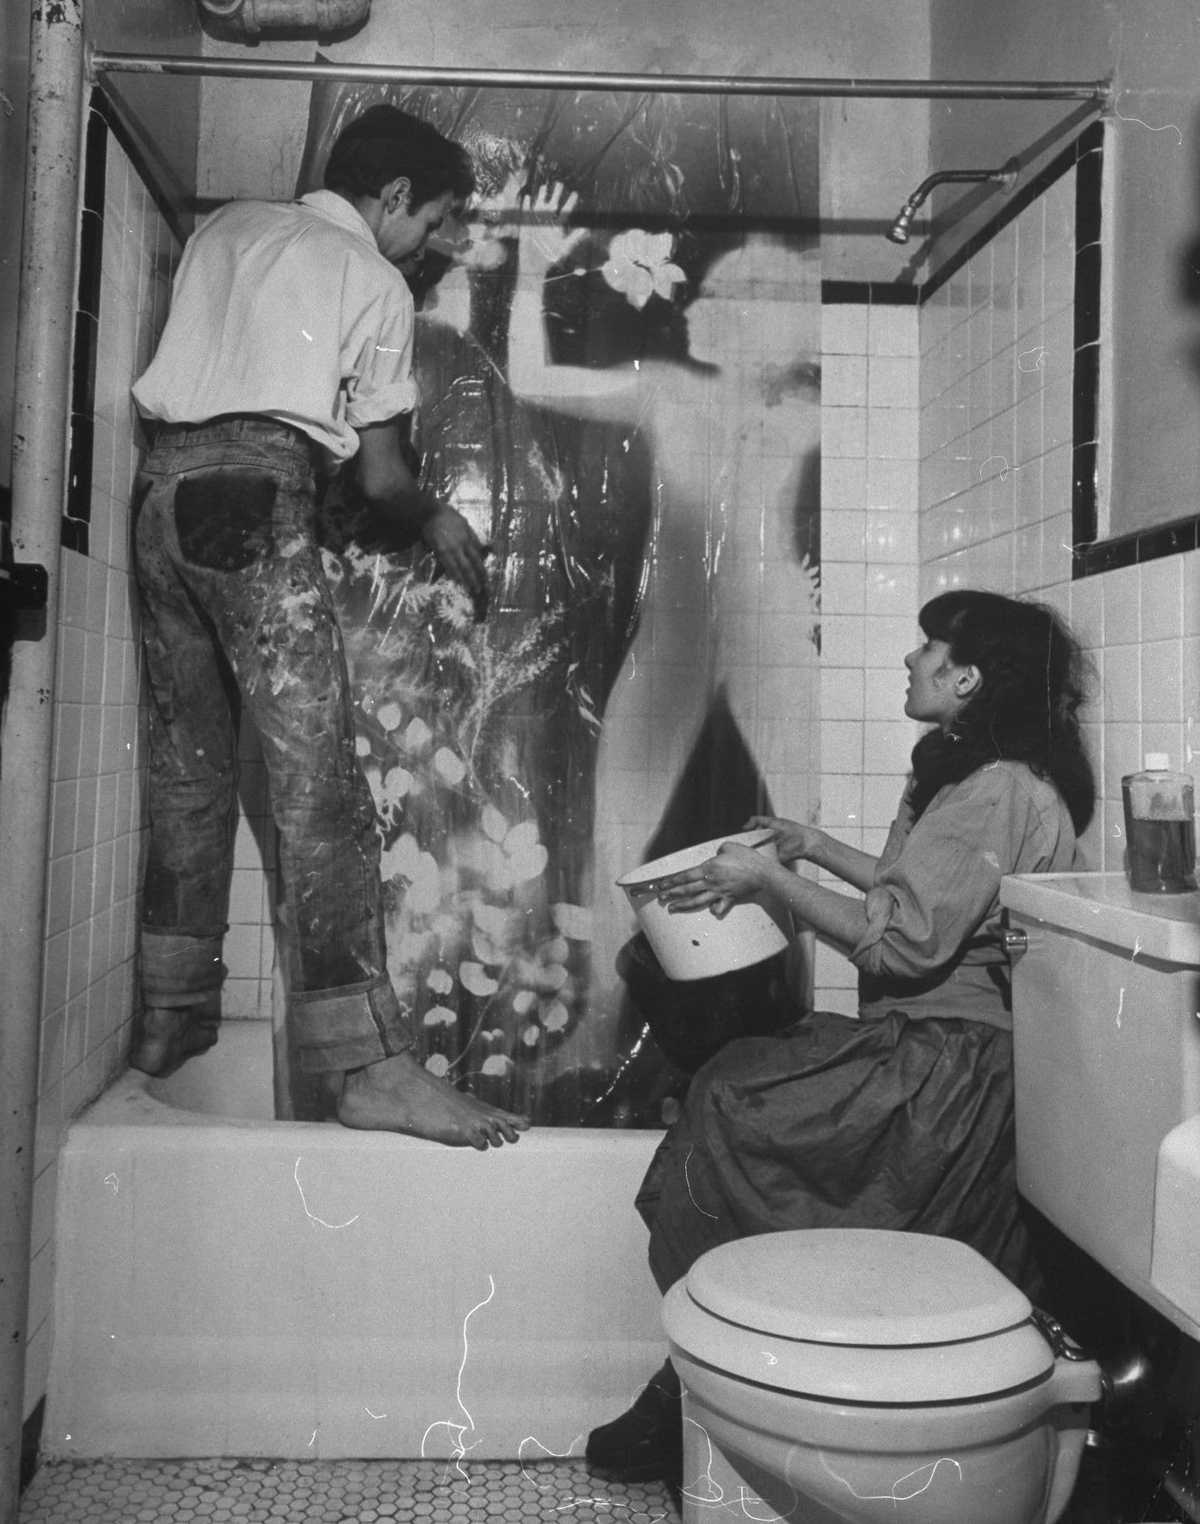 A man stands on a bathtub with an artwork pinned to the wall above the tub. A woman crouches on the floor next to the tub passing something to the man